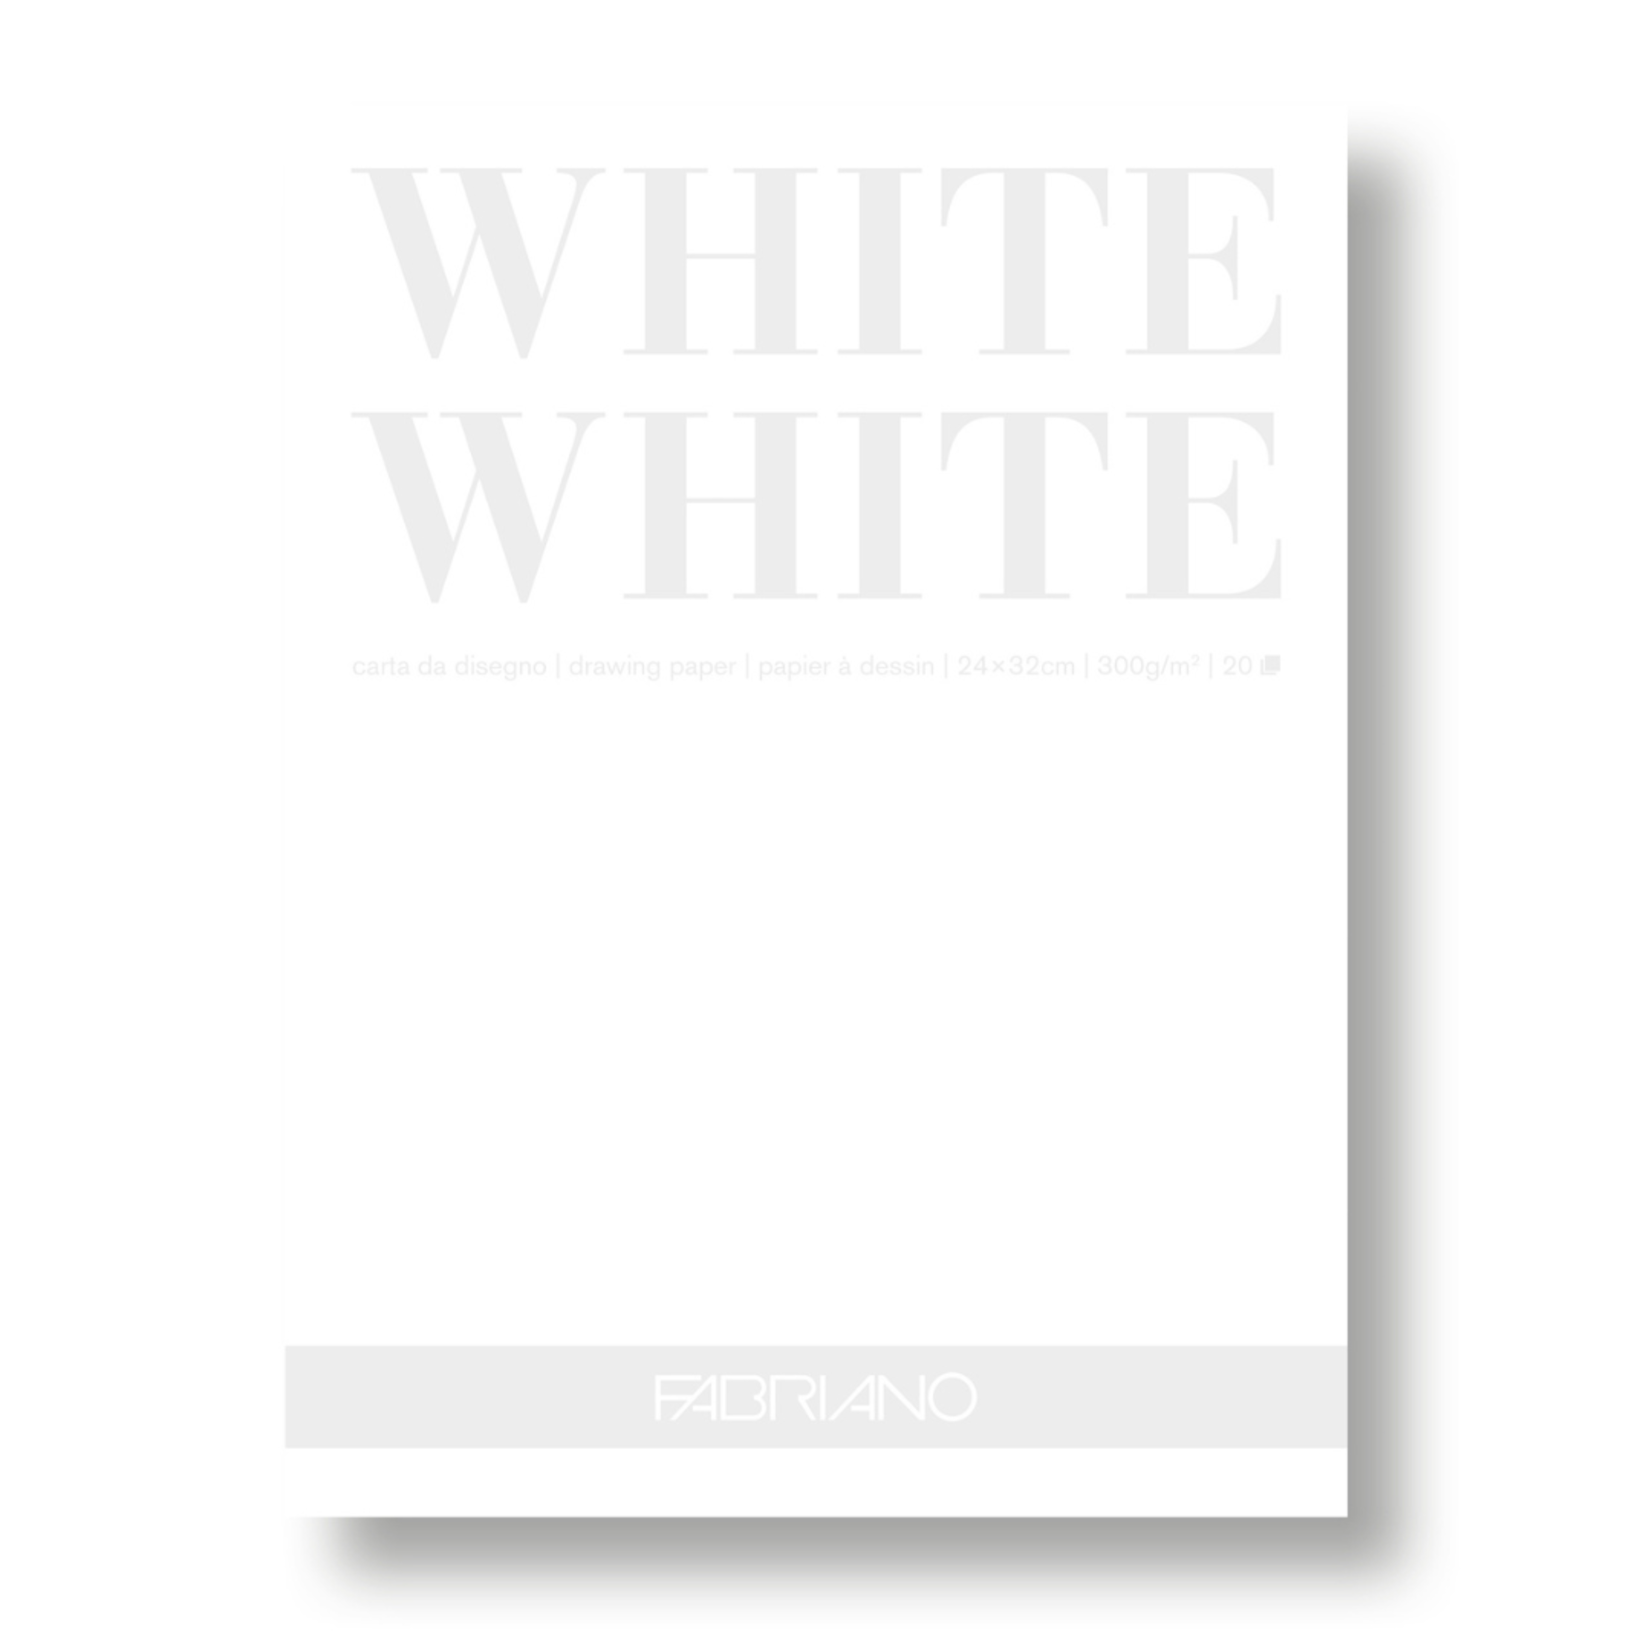 Fabriano FABRIANO WHITE WHITE DRAWING PAPER PAD 9.5X12.5